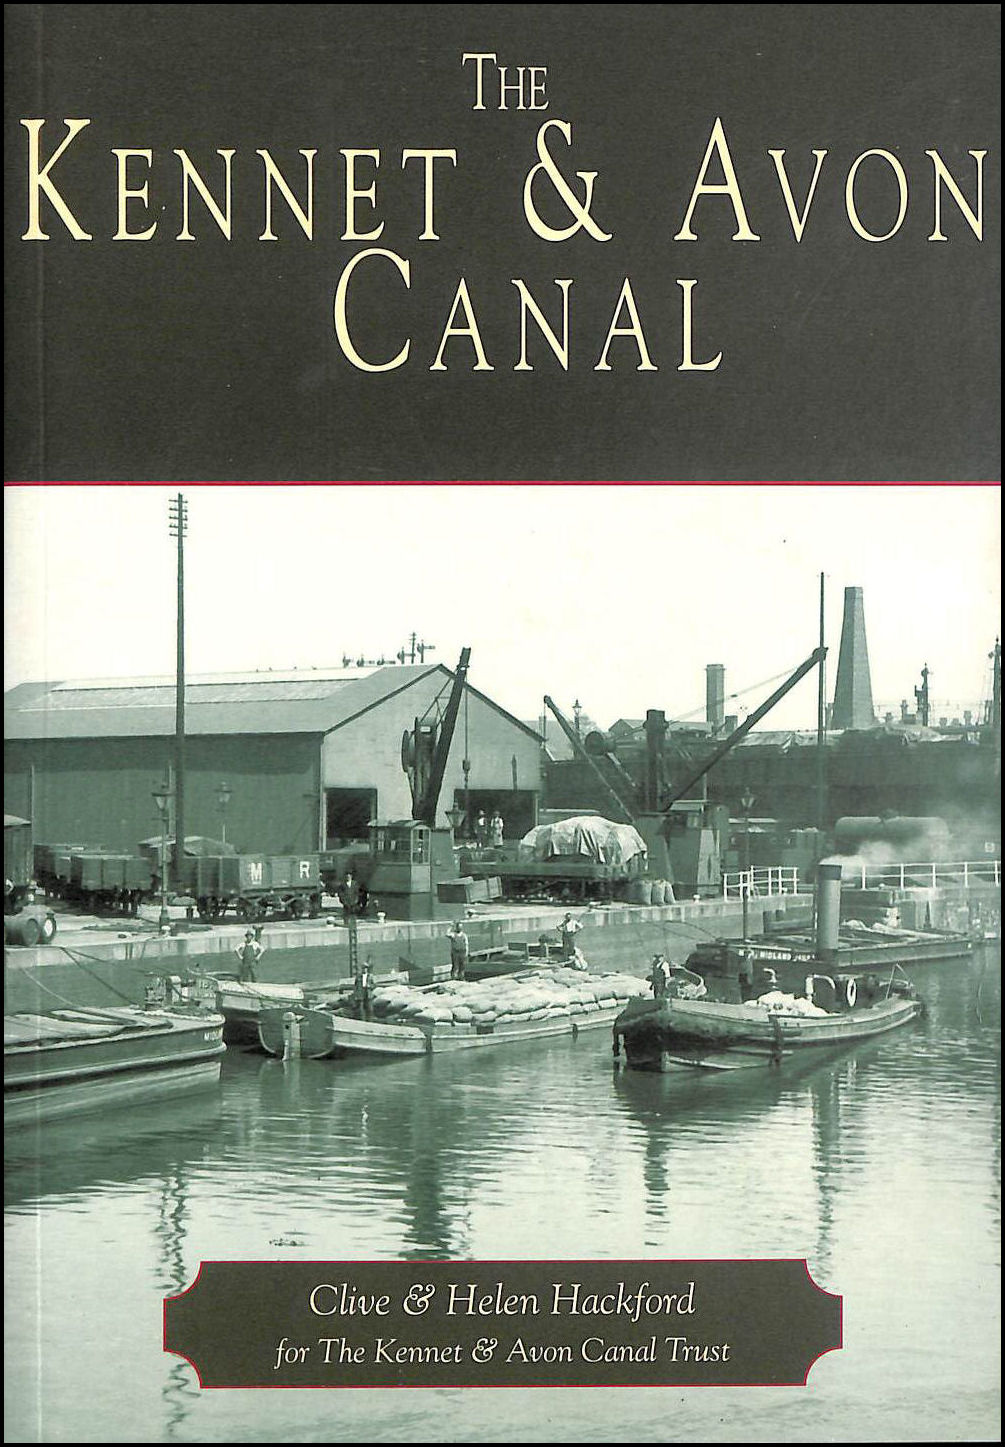 CLIVE HACKFORD; HELEN HACKFORD - The Kennet and Avon Canal